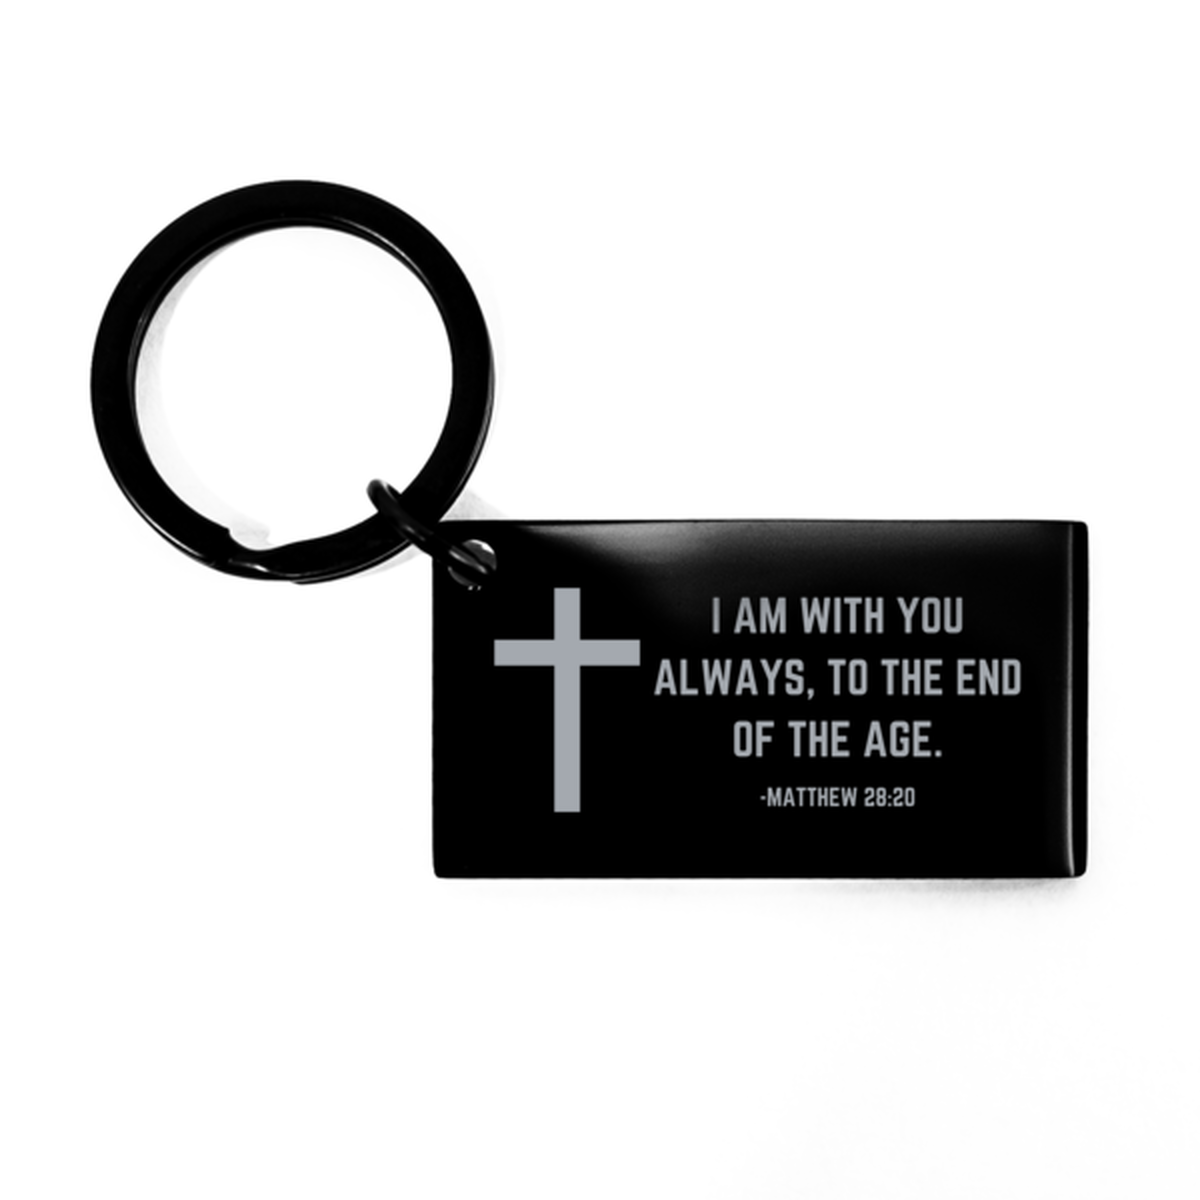 Baptism Gifts For Teenage Boys Girls, Christian Bible Verse Black Keychain, I am with you always, Confirmation Gifts, Bible Verse Keyring for Son, Godson, Grandson, Nephew